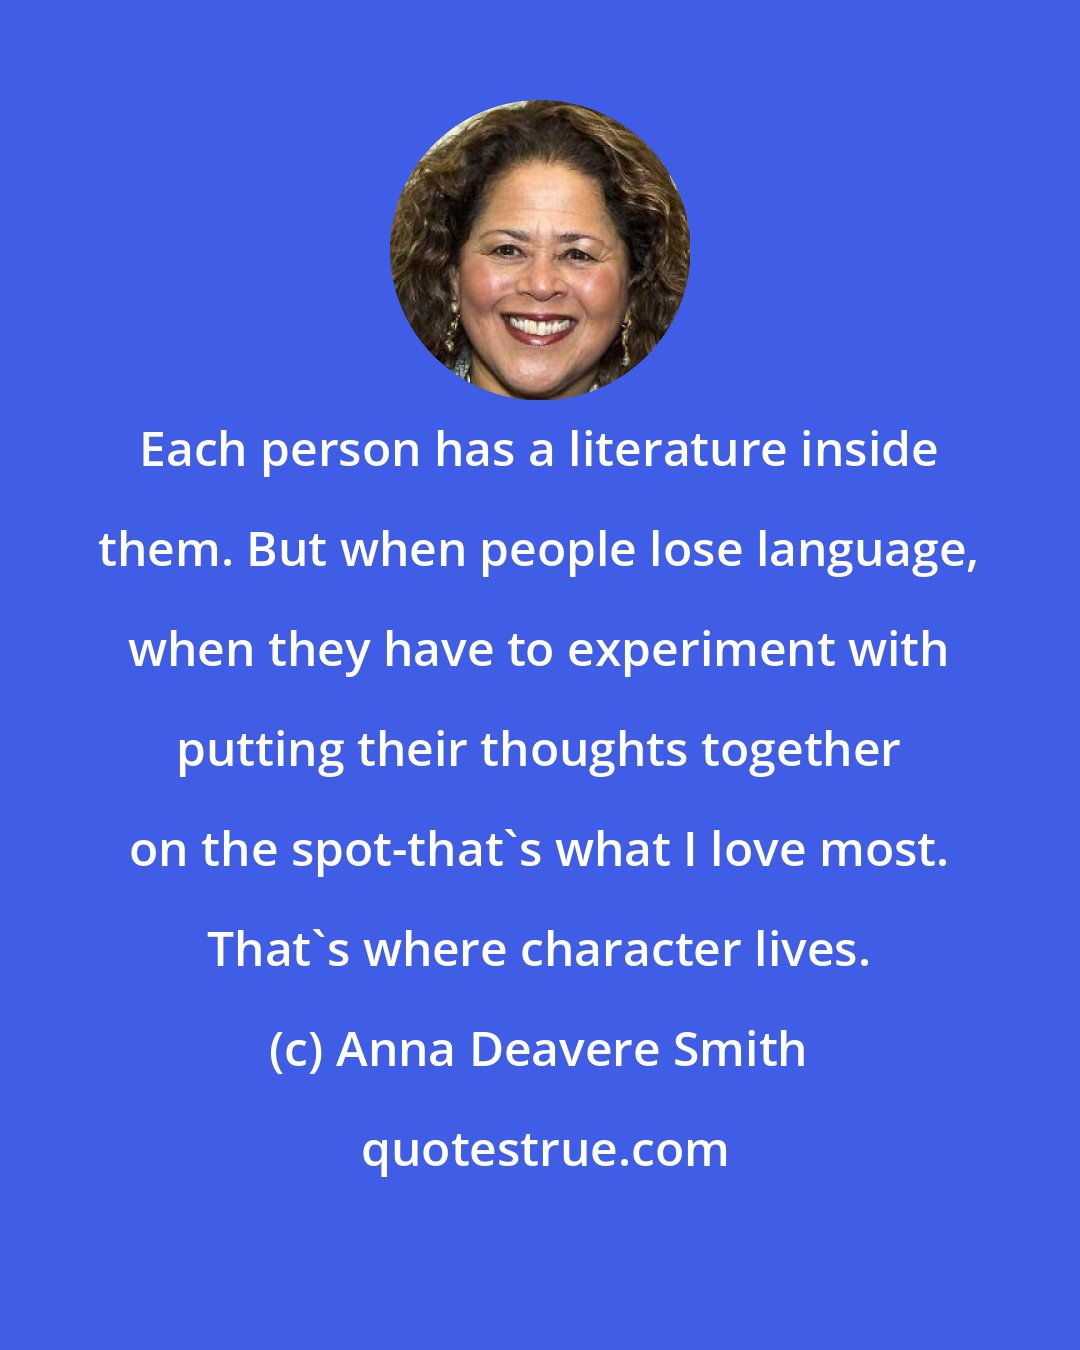 Anna Deavere Smith: Each person has a literature inside them. But when people lose language, when they have to experiment with putting their thoughts together on the spot-that's what I love most. That's where character lives.